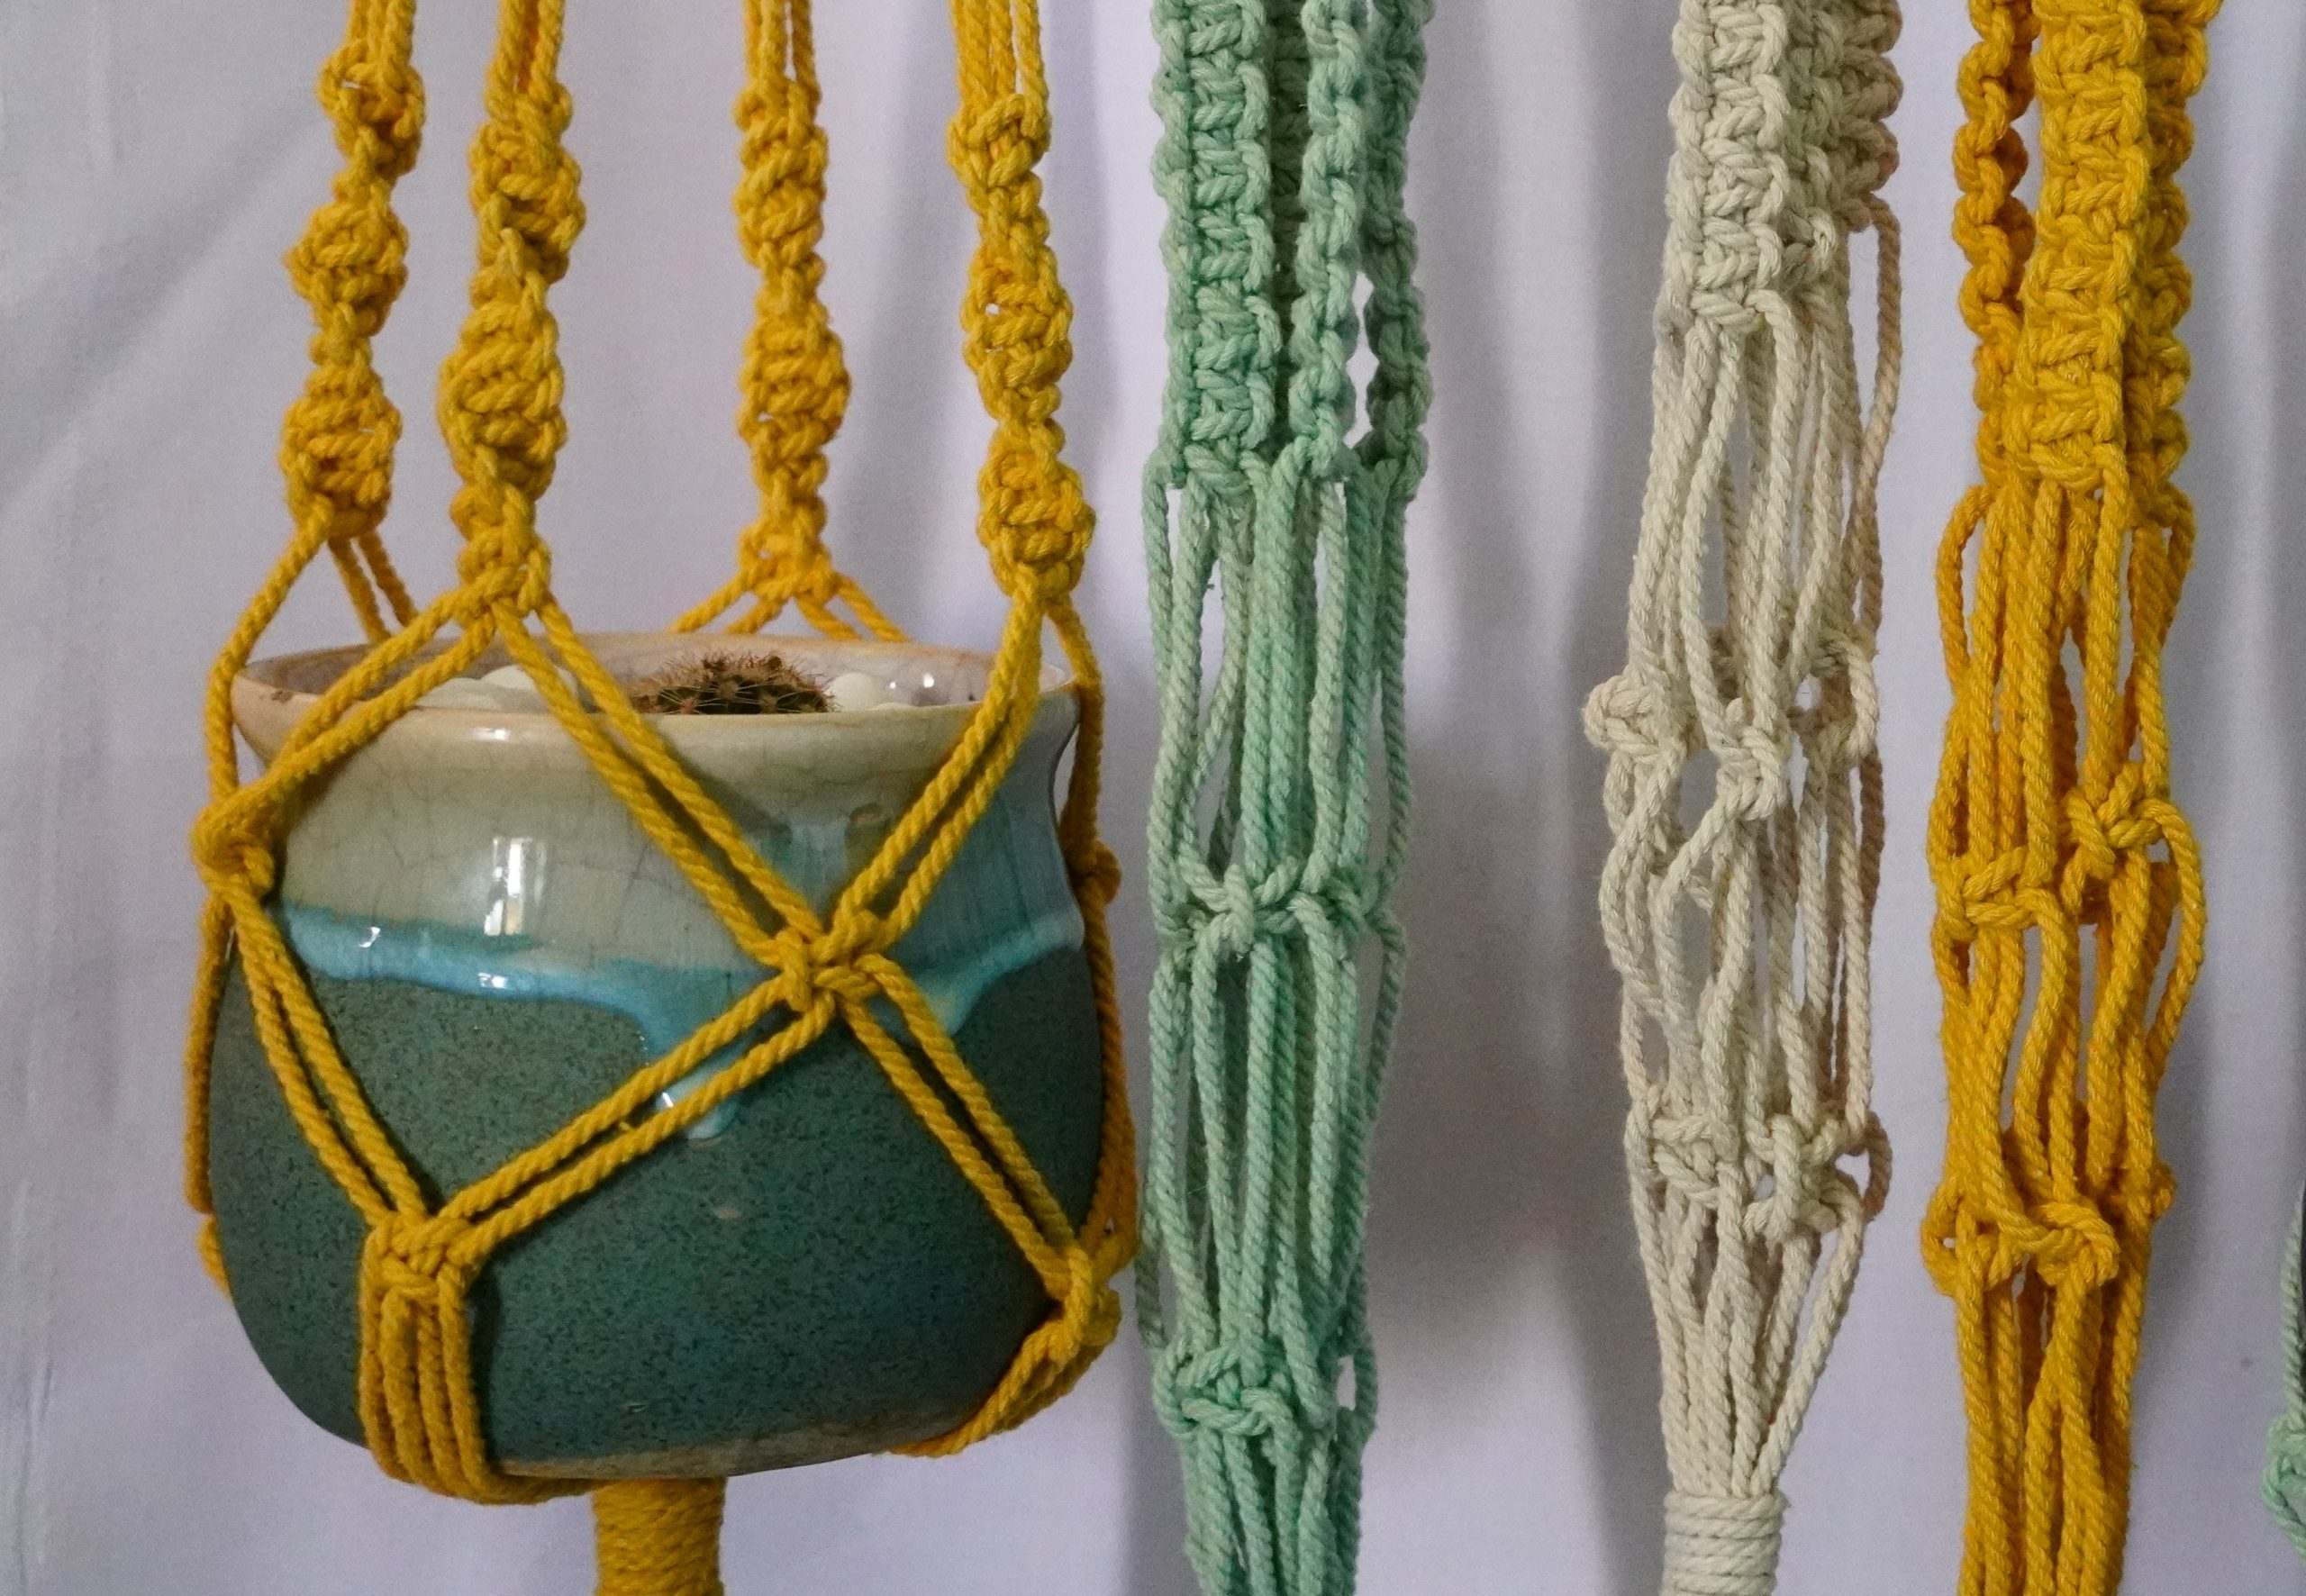 Macrame Laced Plant hangers. Photo: Macrame Laced.